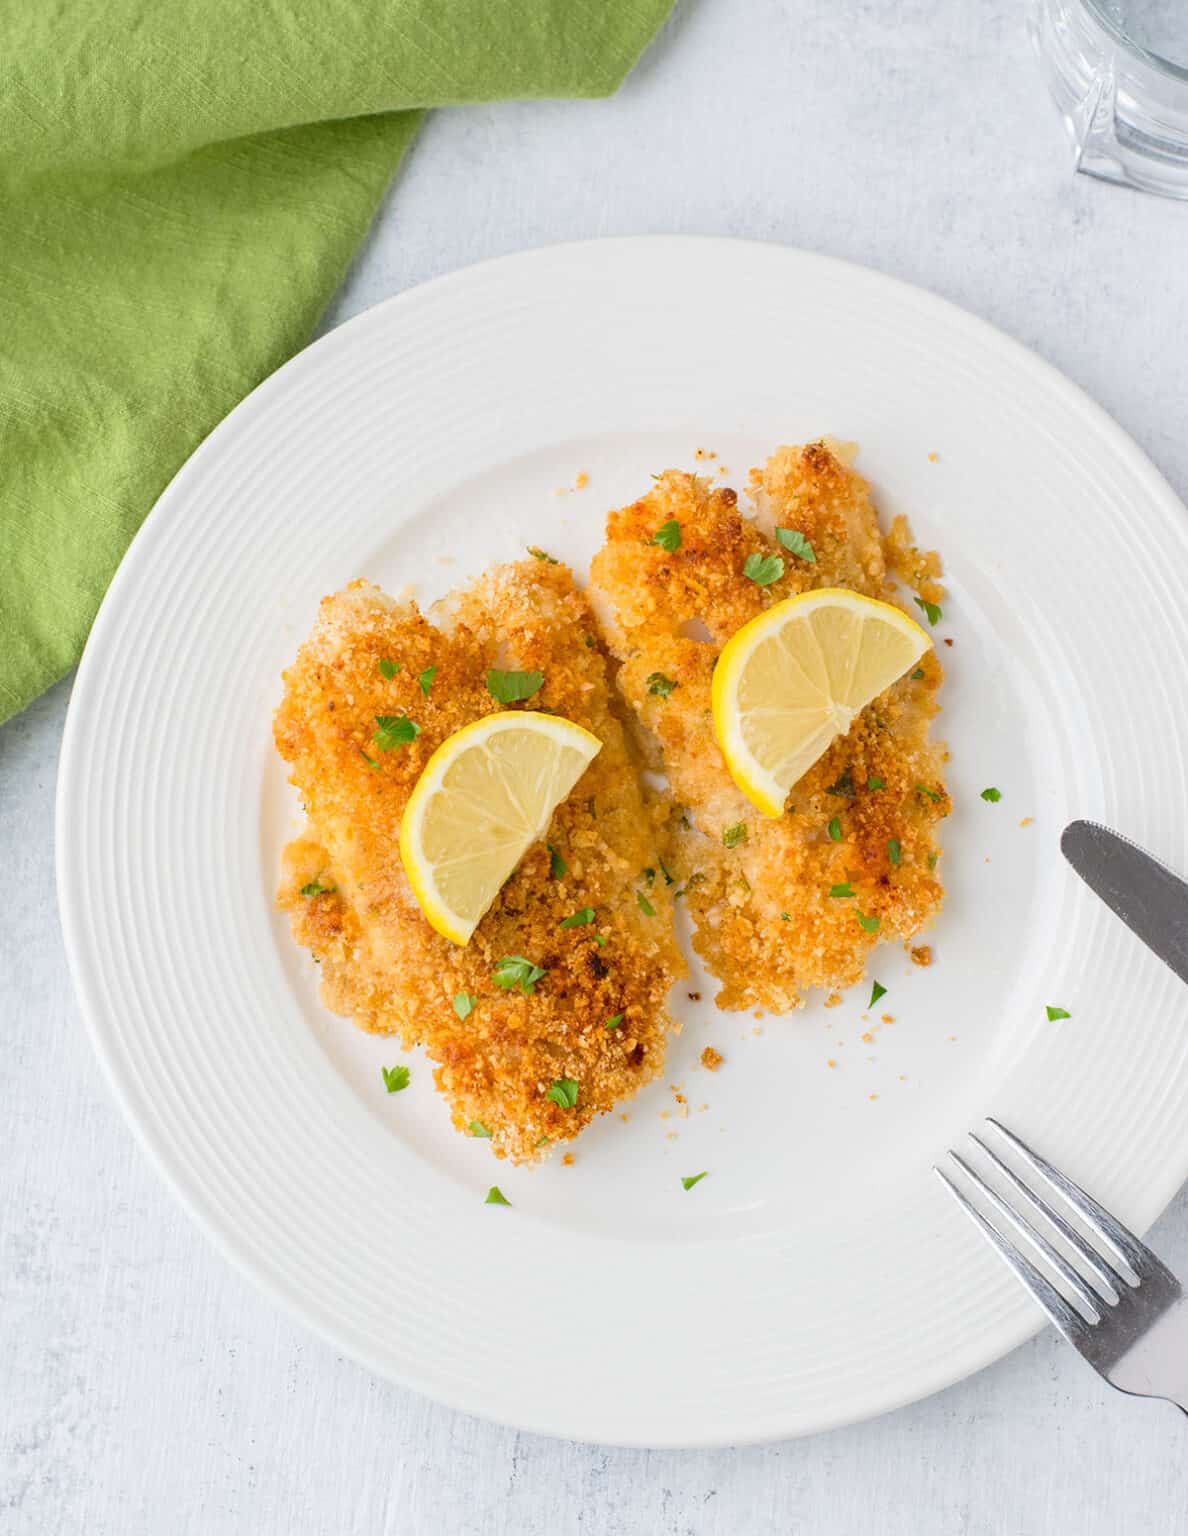 Baked Cod with Bread Crumbs and Butter (Divine!) - Cooking with Mamma C